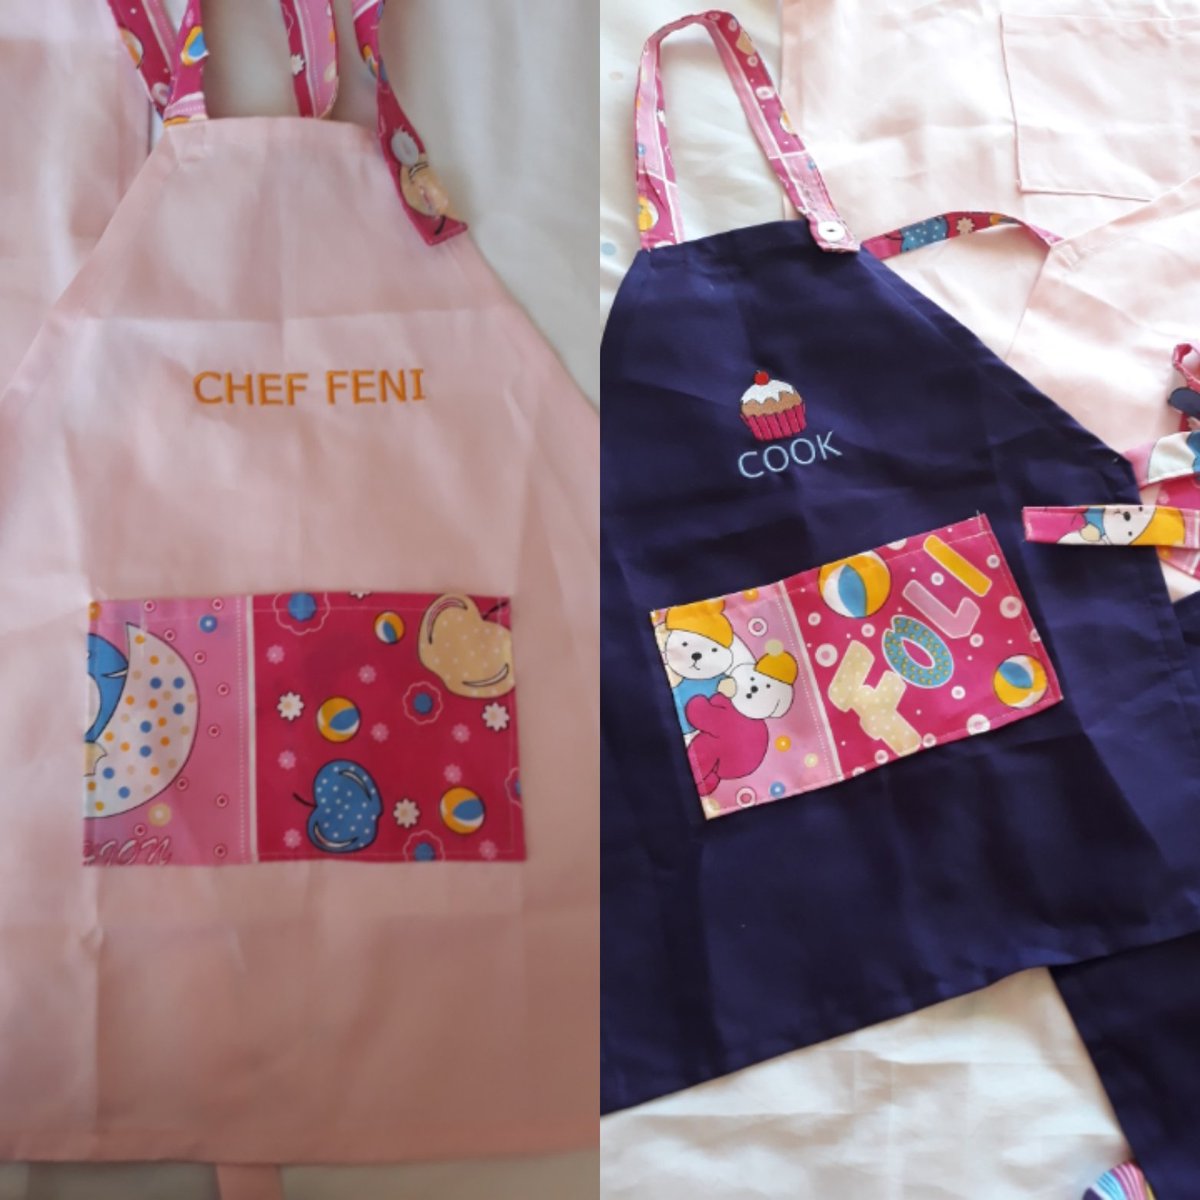 We make aprons for kids and adults 

#catering 
#kids #kidsapron #Aprons #chef #littlecook #food #entrepreneur #womeninbusiness